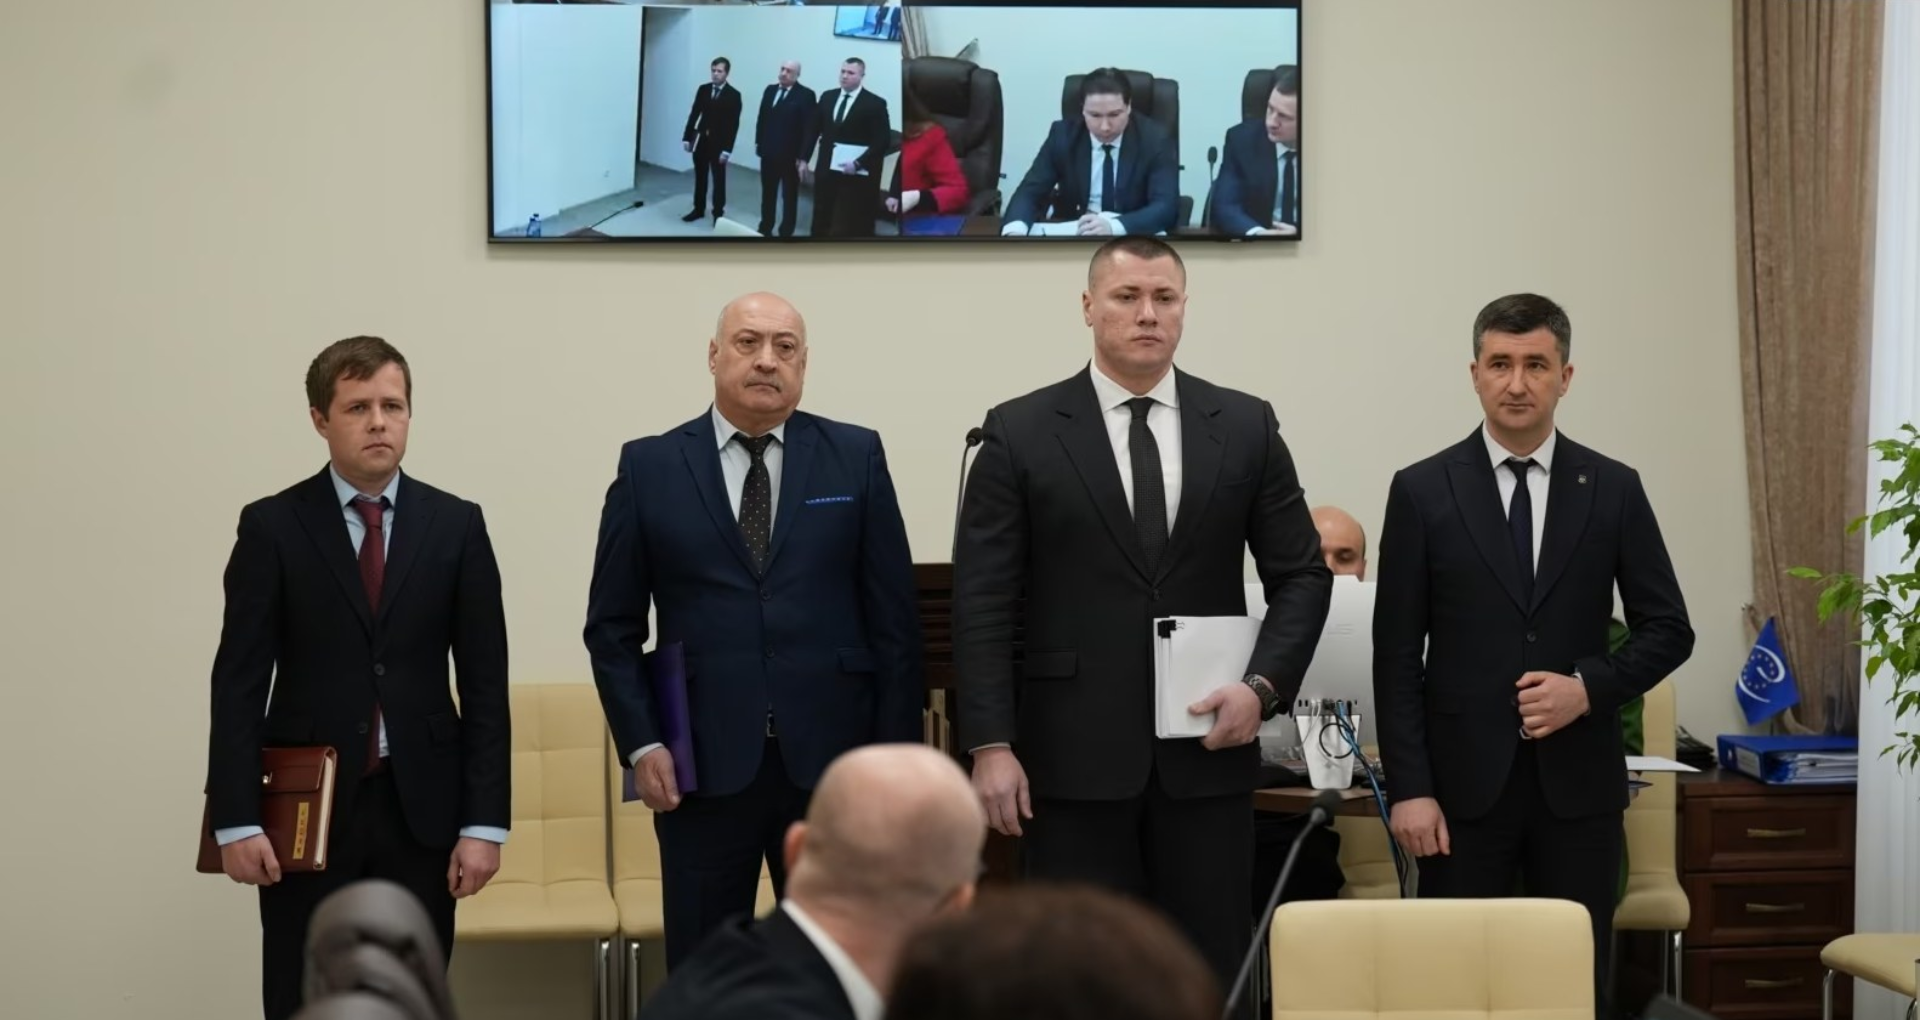 Arrested and charged with corruption in 2015, a former district president was acquitted by the Chisinau Court in 2023. Reasons given by the court